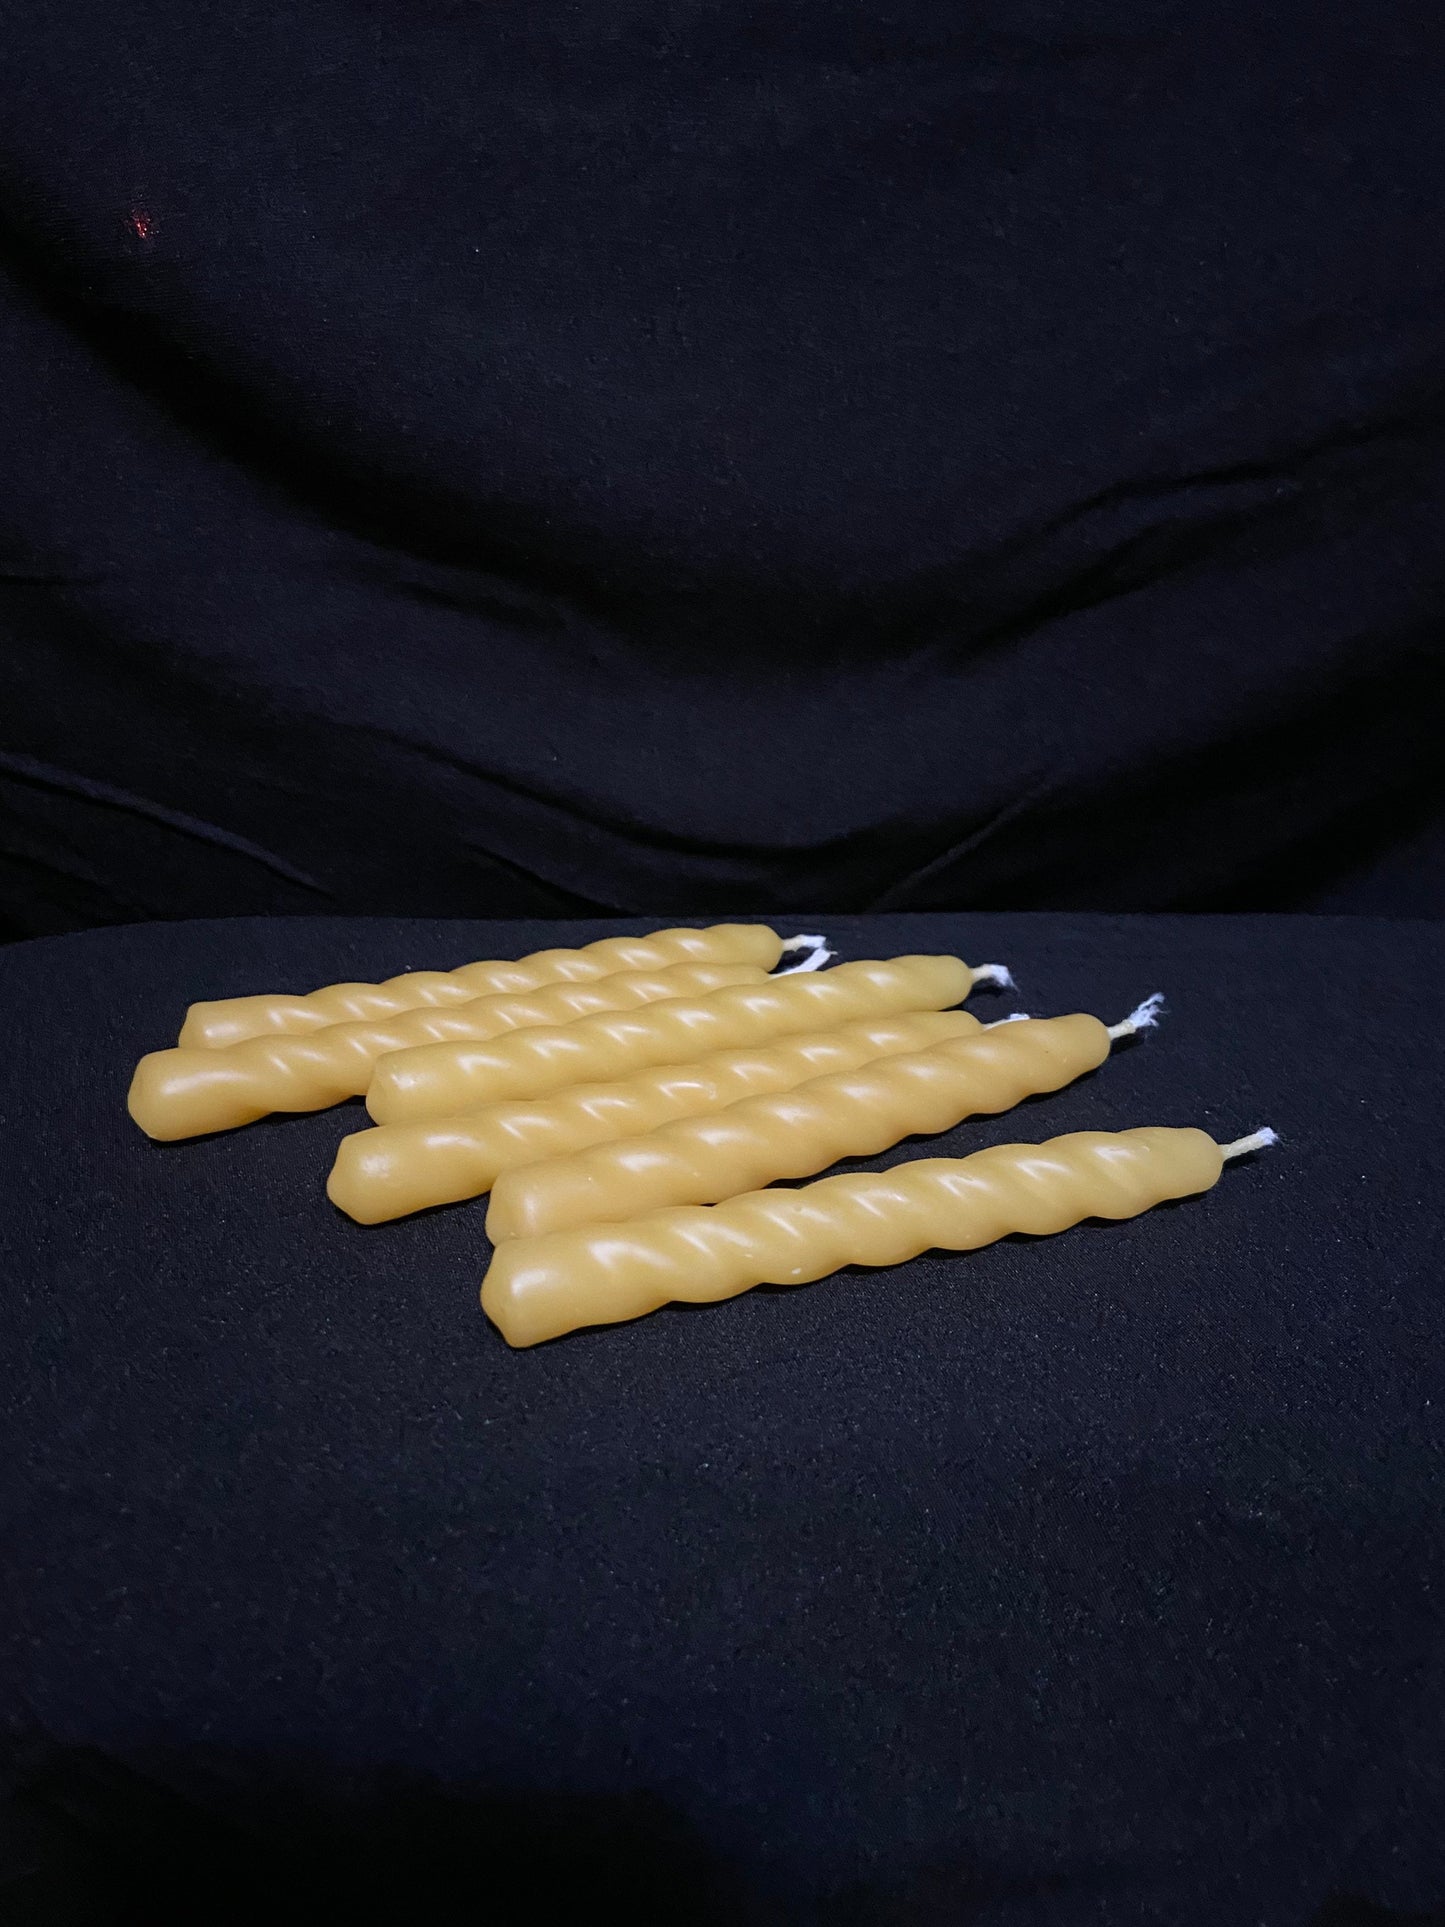 100% Pure Beeswax-Birthday-Celebration-SpiralTapers-Small Tapers-Chime Candles-Prayer-Spell-Meditation-Set of 6